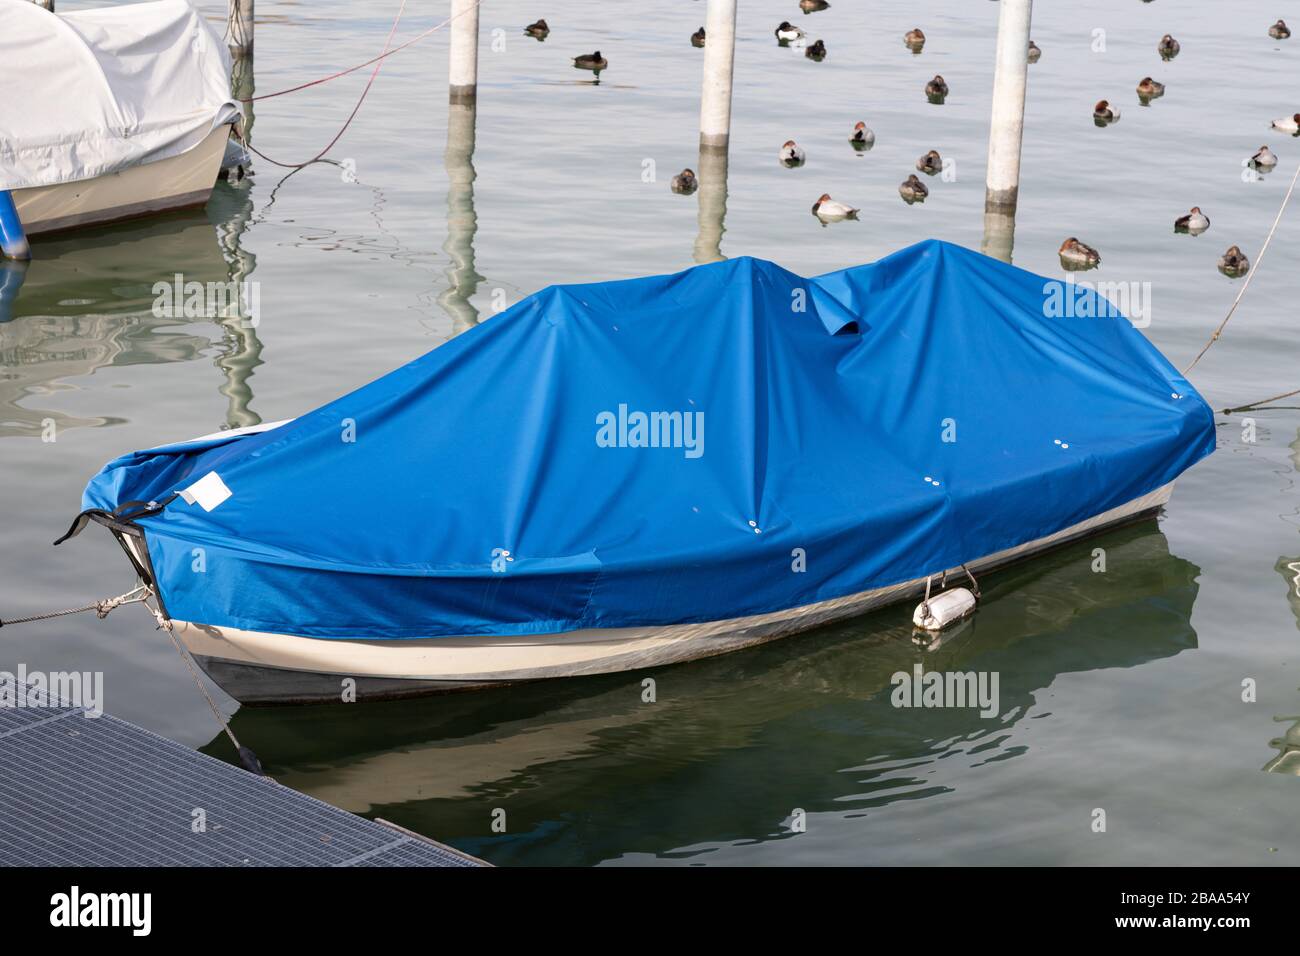 https://c8.alamy.com/comp/2BAA54Y/white-fishing-boat-with-blue-boat-cover-cloudy-sky-and-brown-white-ducks-in-the-background-by-day-2BAA54Y.jpg